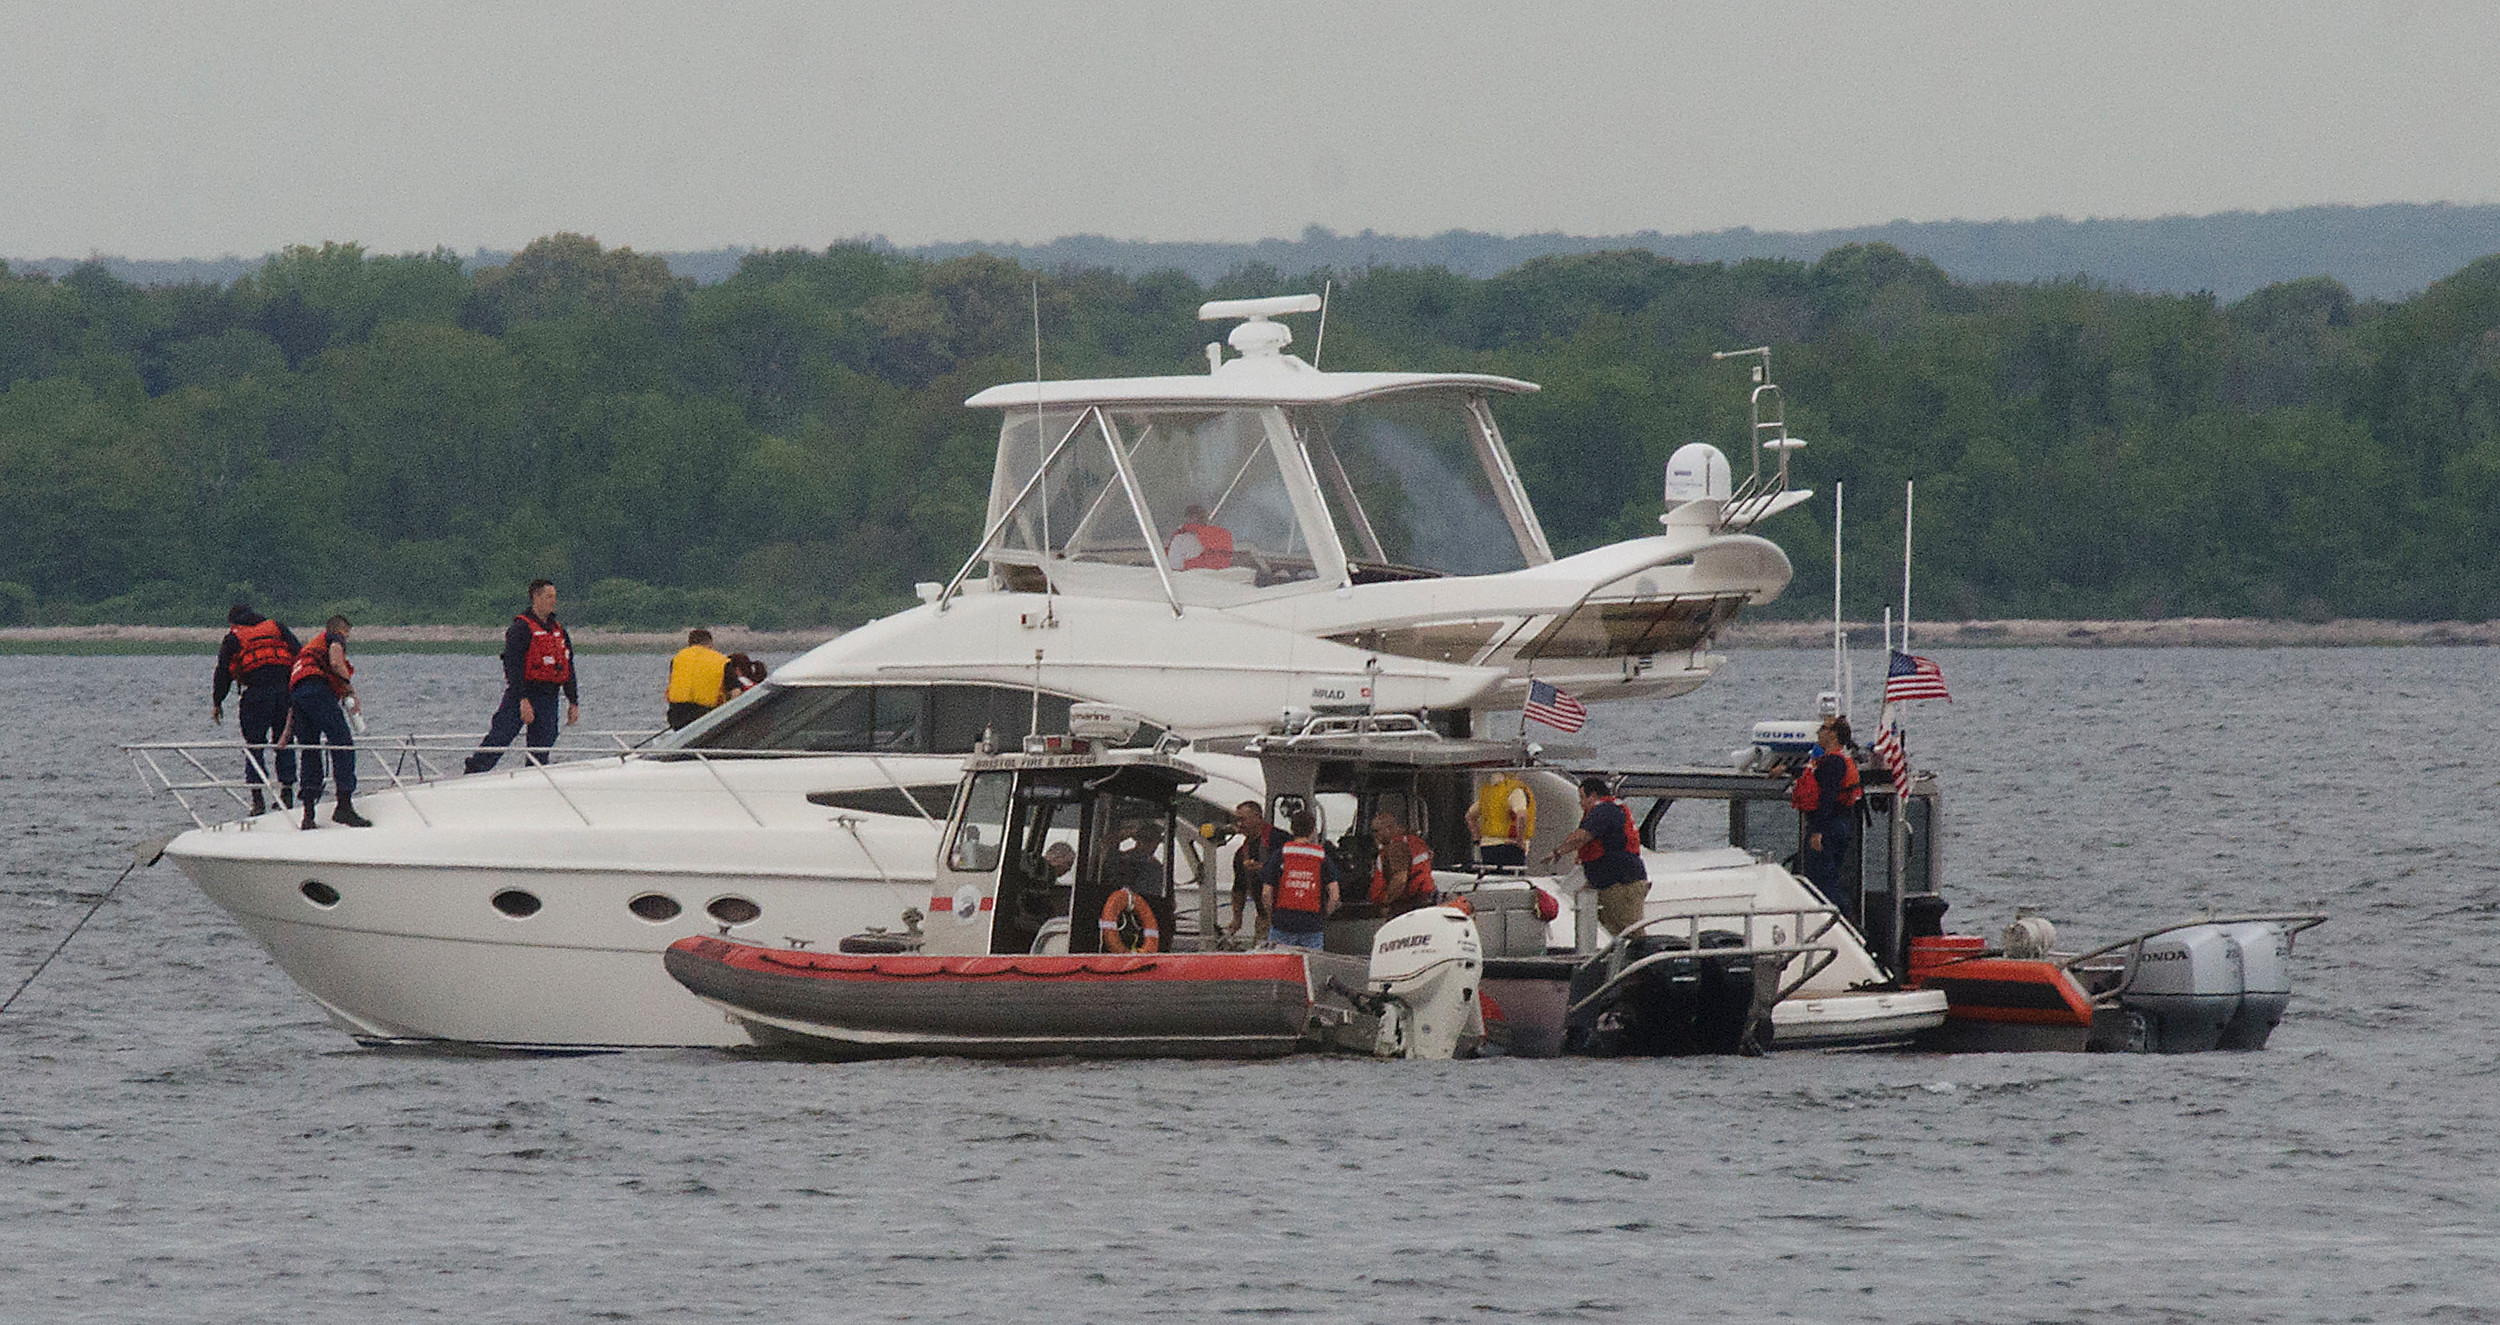 Bristol fire and Coast Guard respond to a boat fire off of Colt State Park on Tuesday, shortly after noontime. The boat fire was small and put out by the owner before rescue crews arrived according to a fireman.